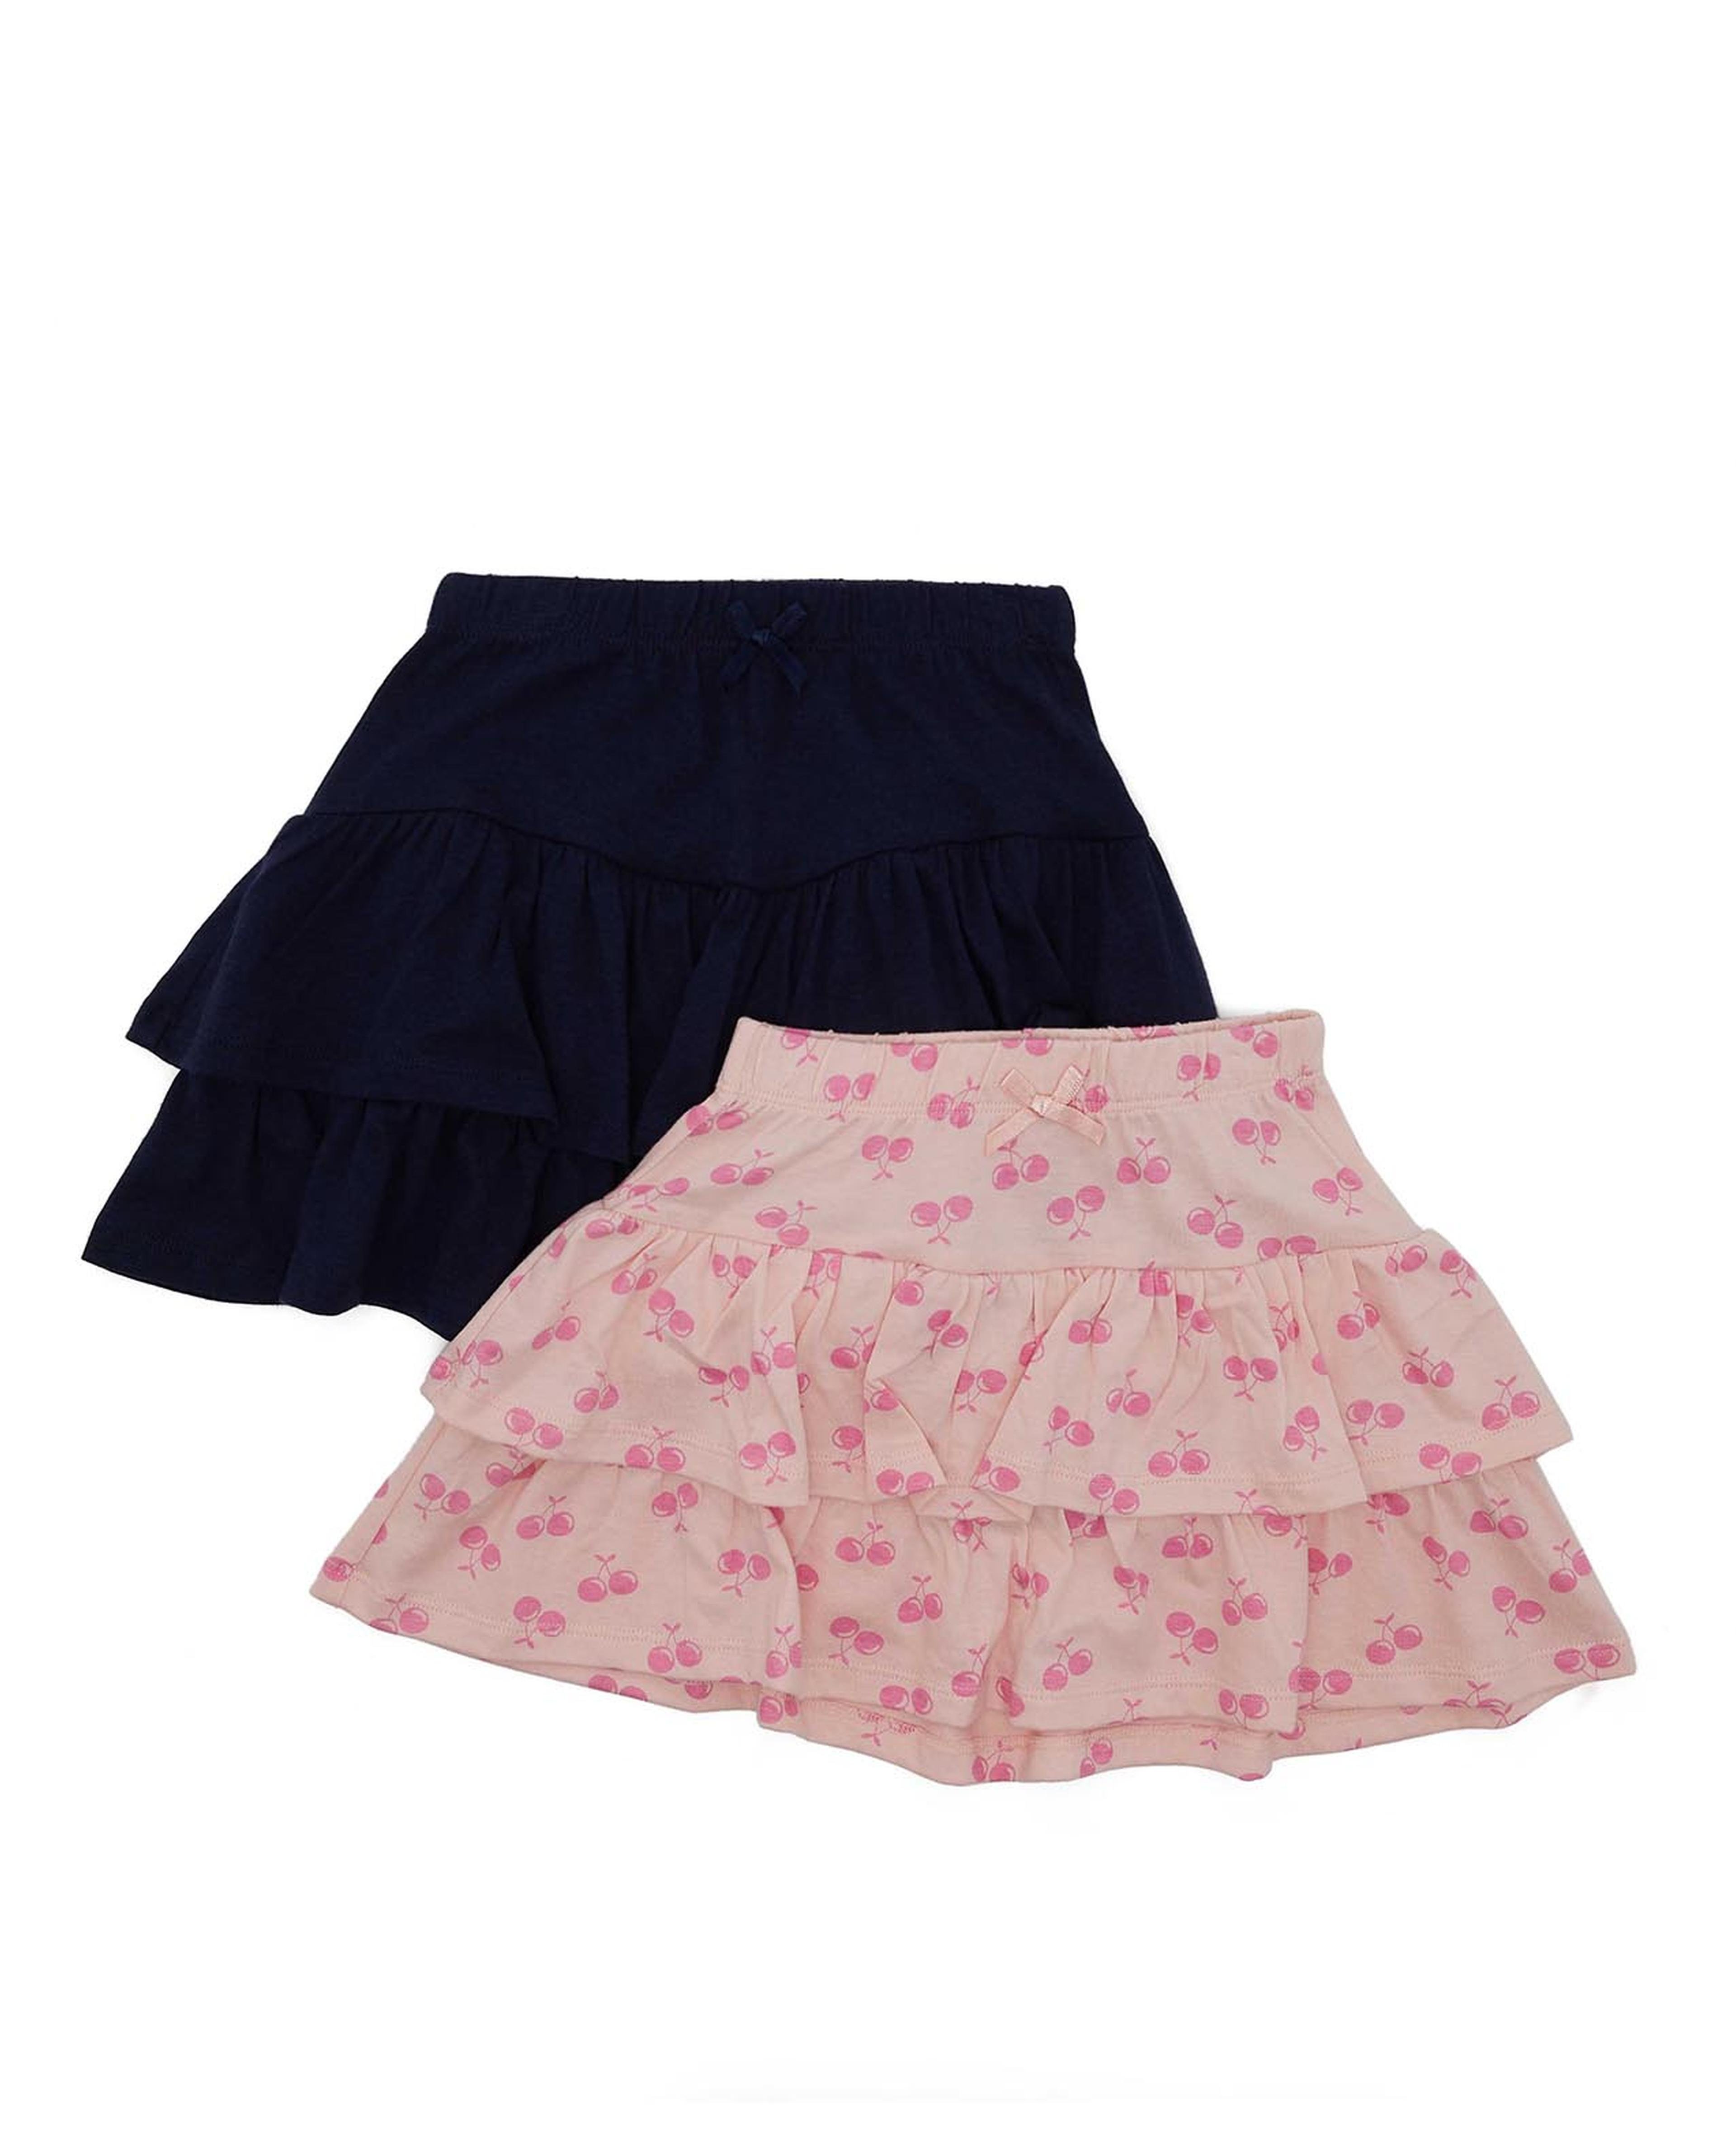 Pack of 2 Layered Skirts with Elastic Waist